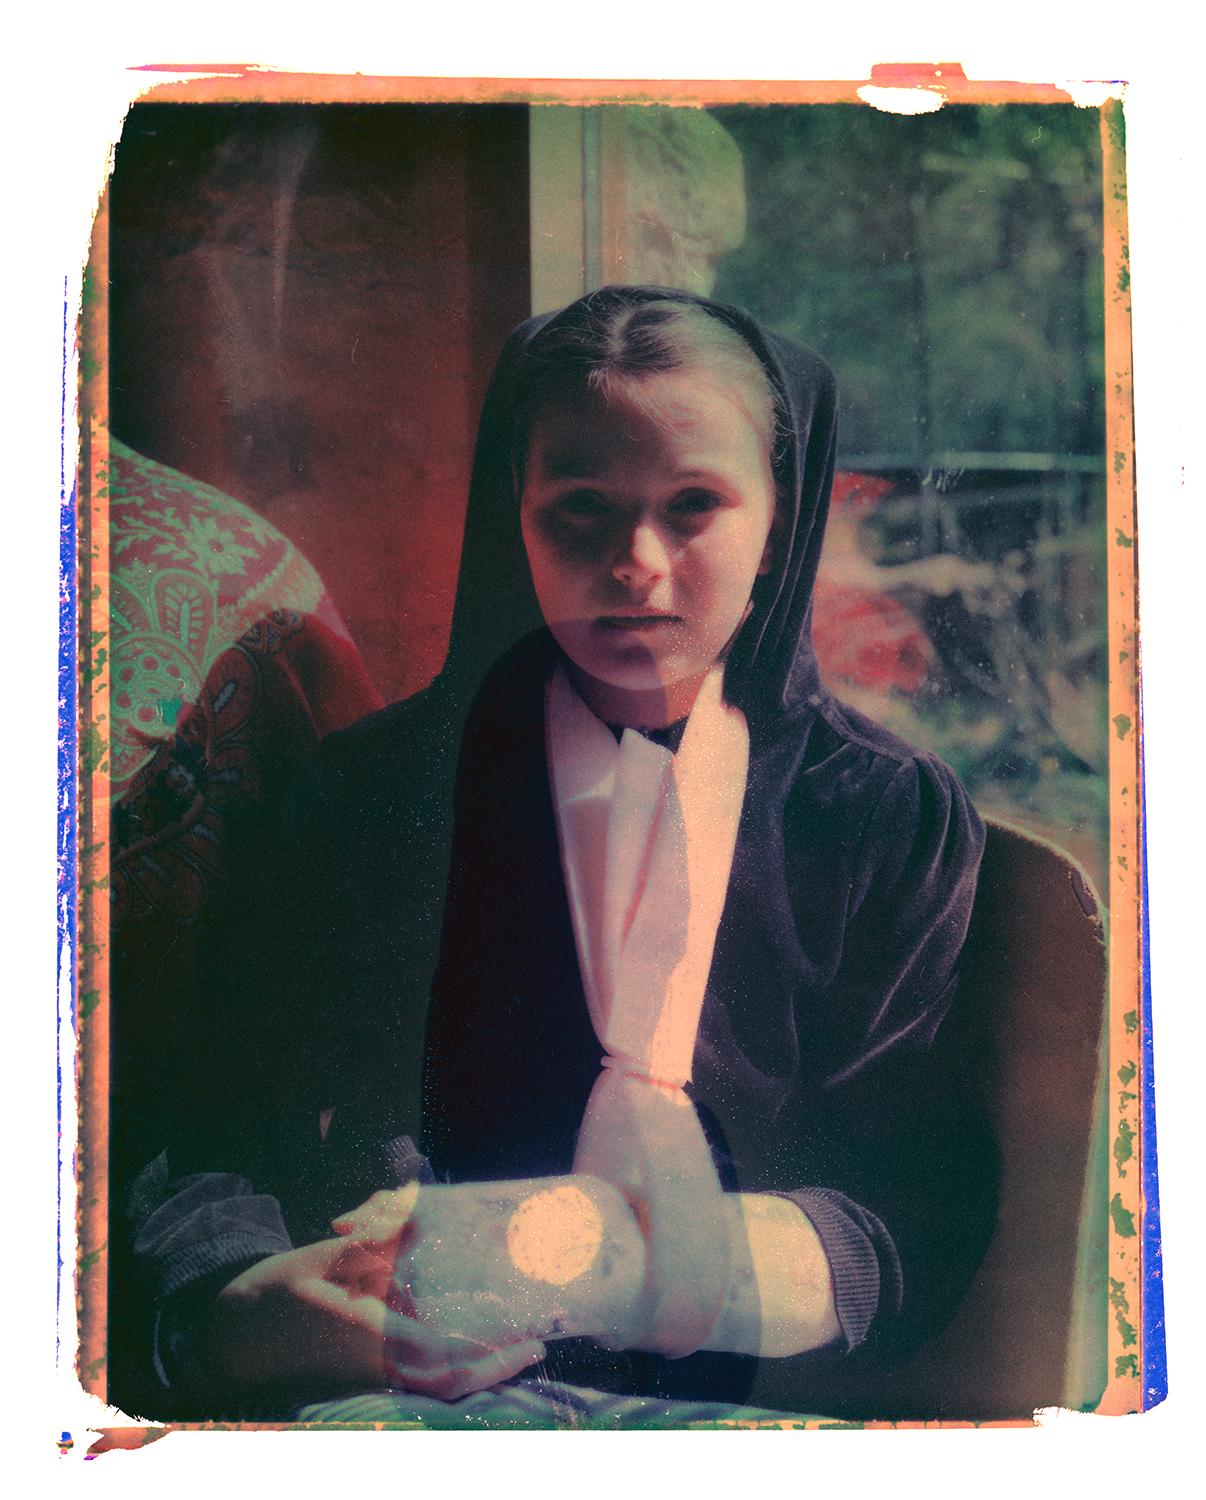 Cristina Fontsare Portrait Photograph - Gaell with broken arm - Contemporary, Polaroid, Photograph, Childhood, abstract